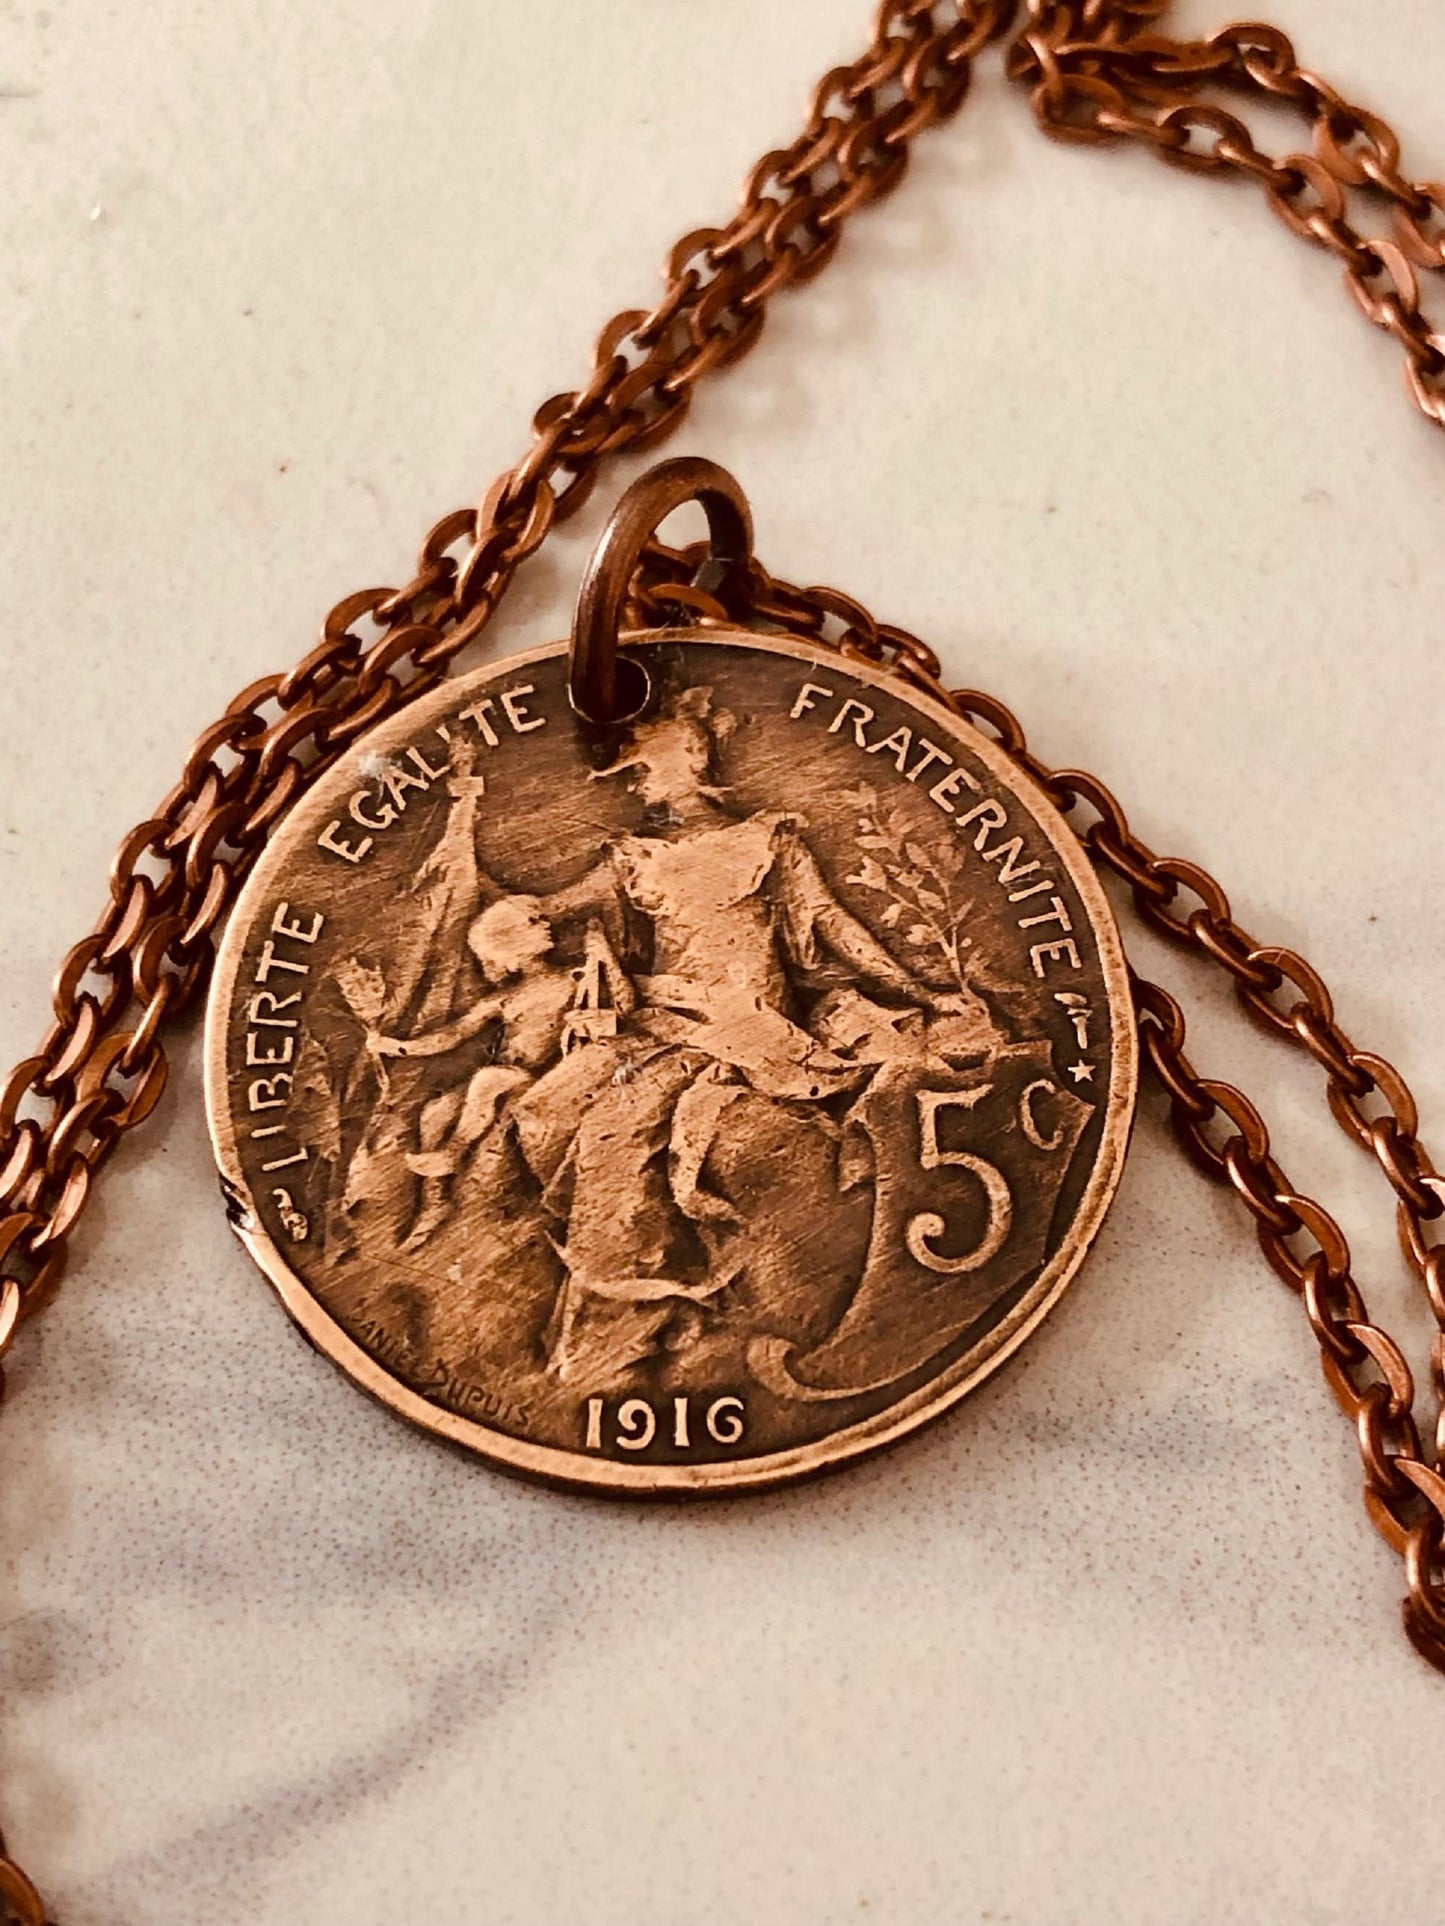 France Coin Necklace French Pendant 5 Centimes Liberty Equality Fraternity Custom Made Vintage Rare coins, Coin Enthusiast, Choose Your Year